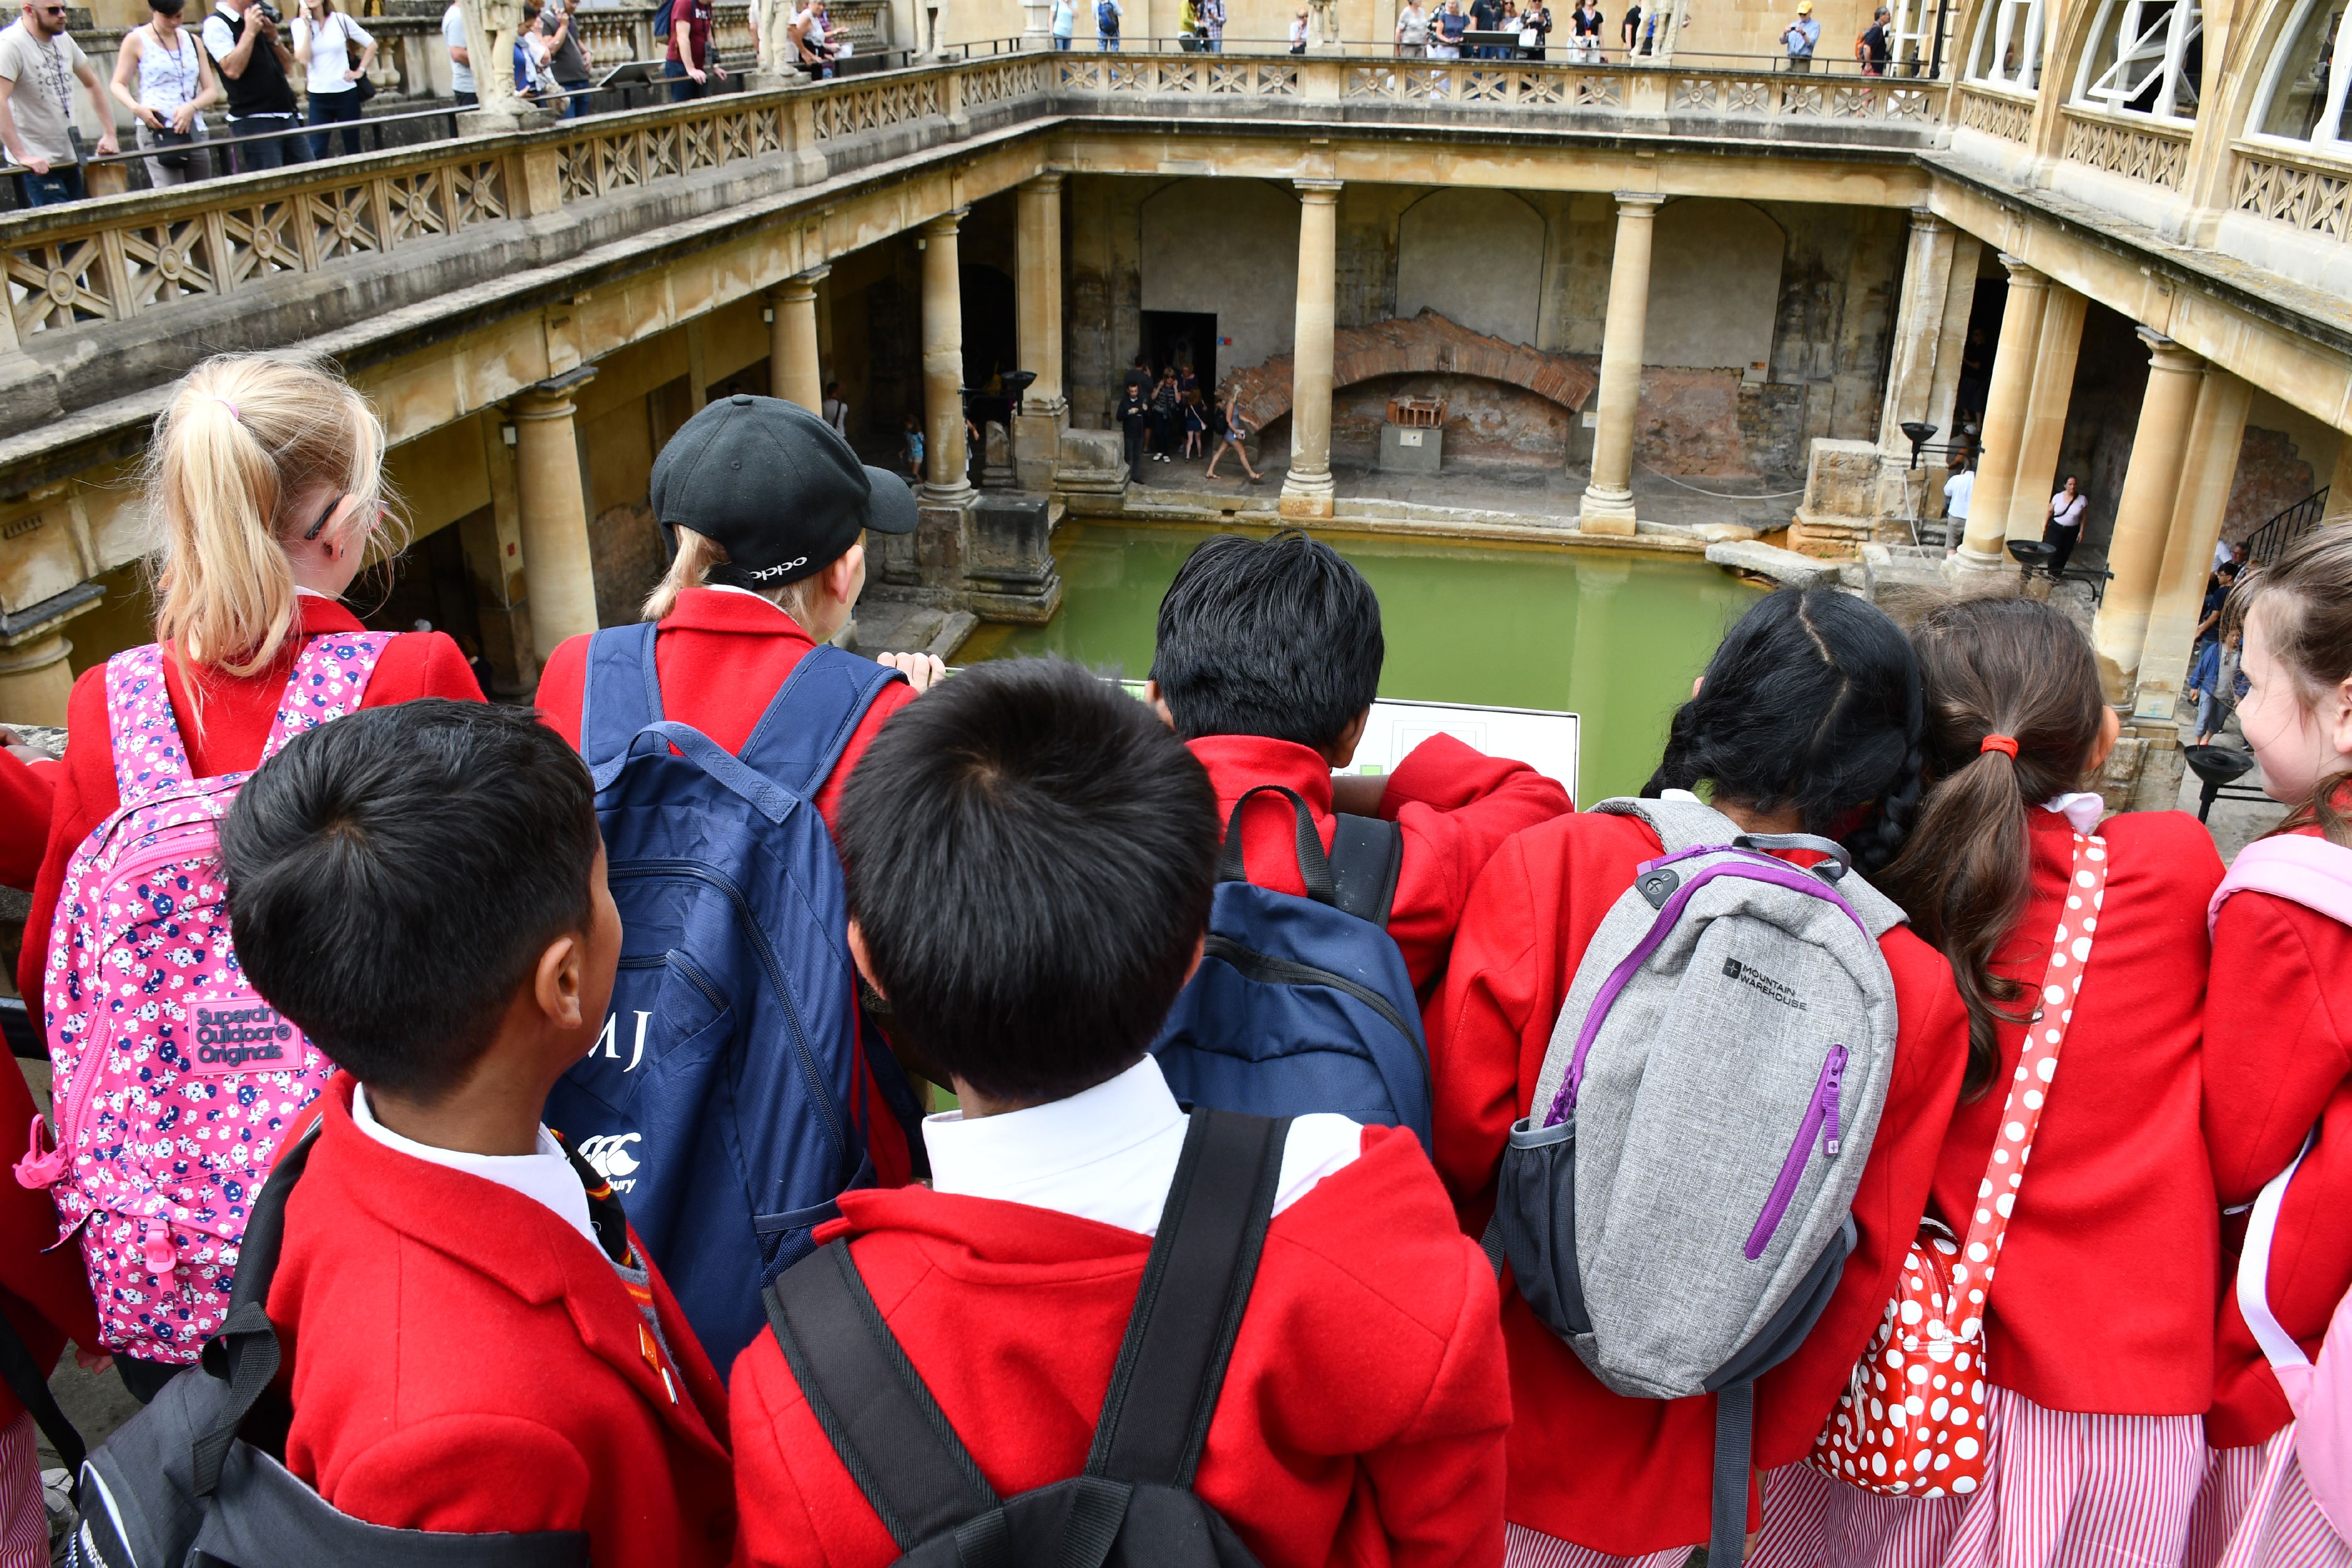 Elementary School Students at Roman Baths, Bath, England. (Photo by: Education Images/Universal Images Group via Getty Images)